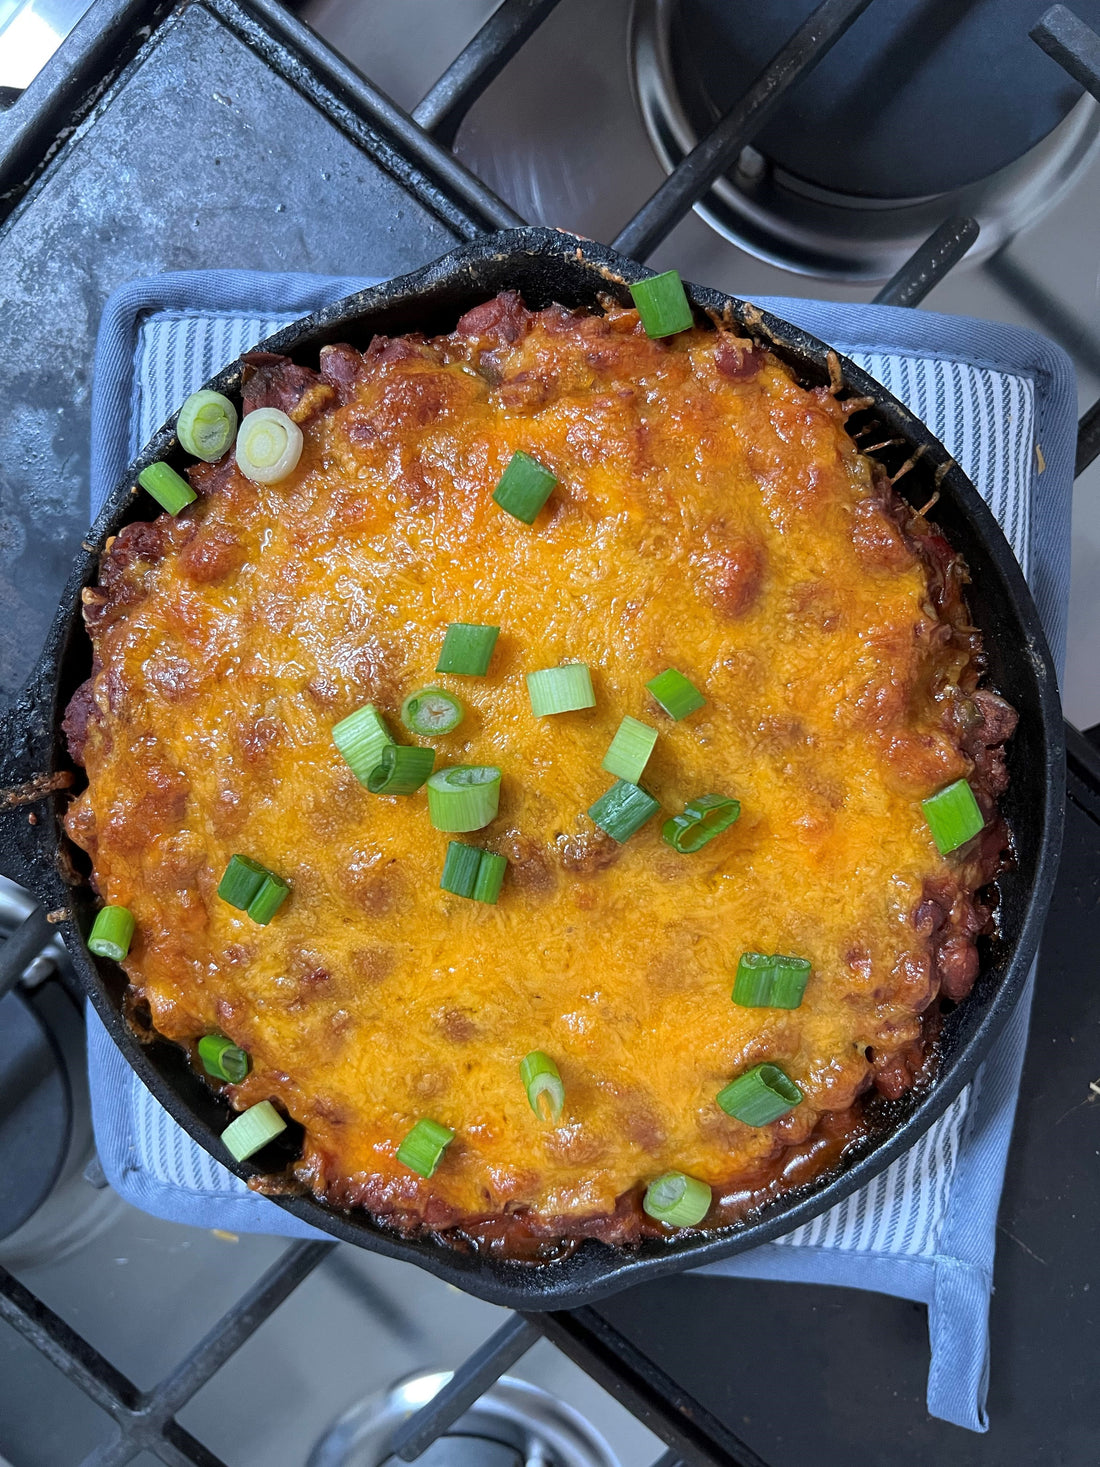 Marie Callender's Southern Style Corn Bread Chili Skillet